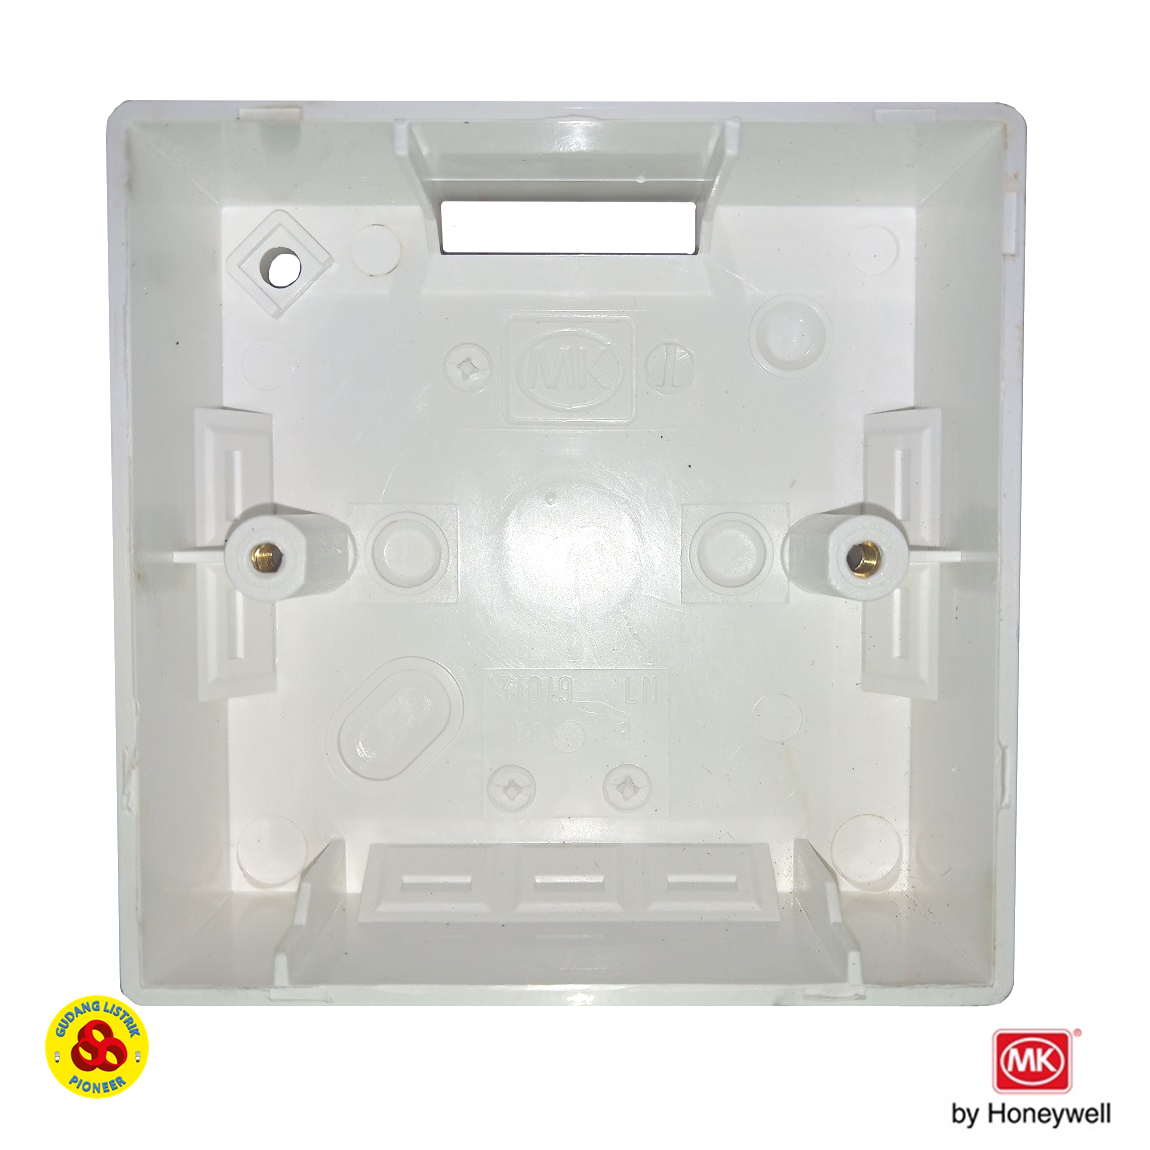 OUTBOW DUS MK 31019WHI 1G SURFACE BOX 32MM DEPTH